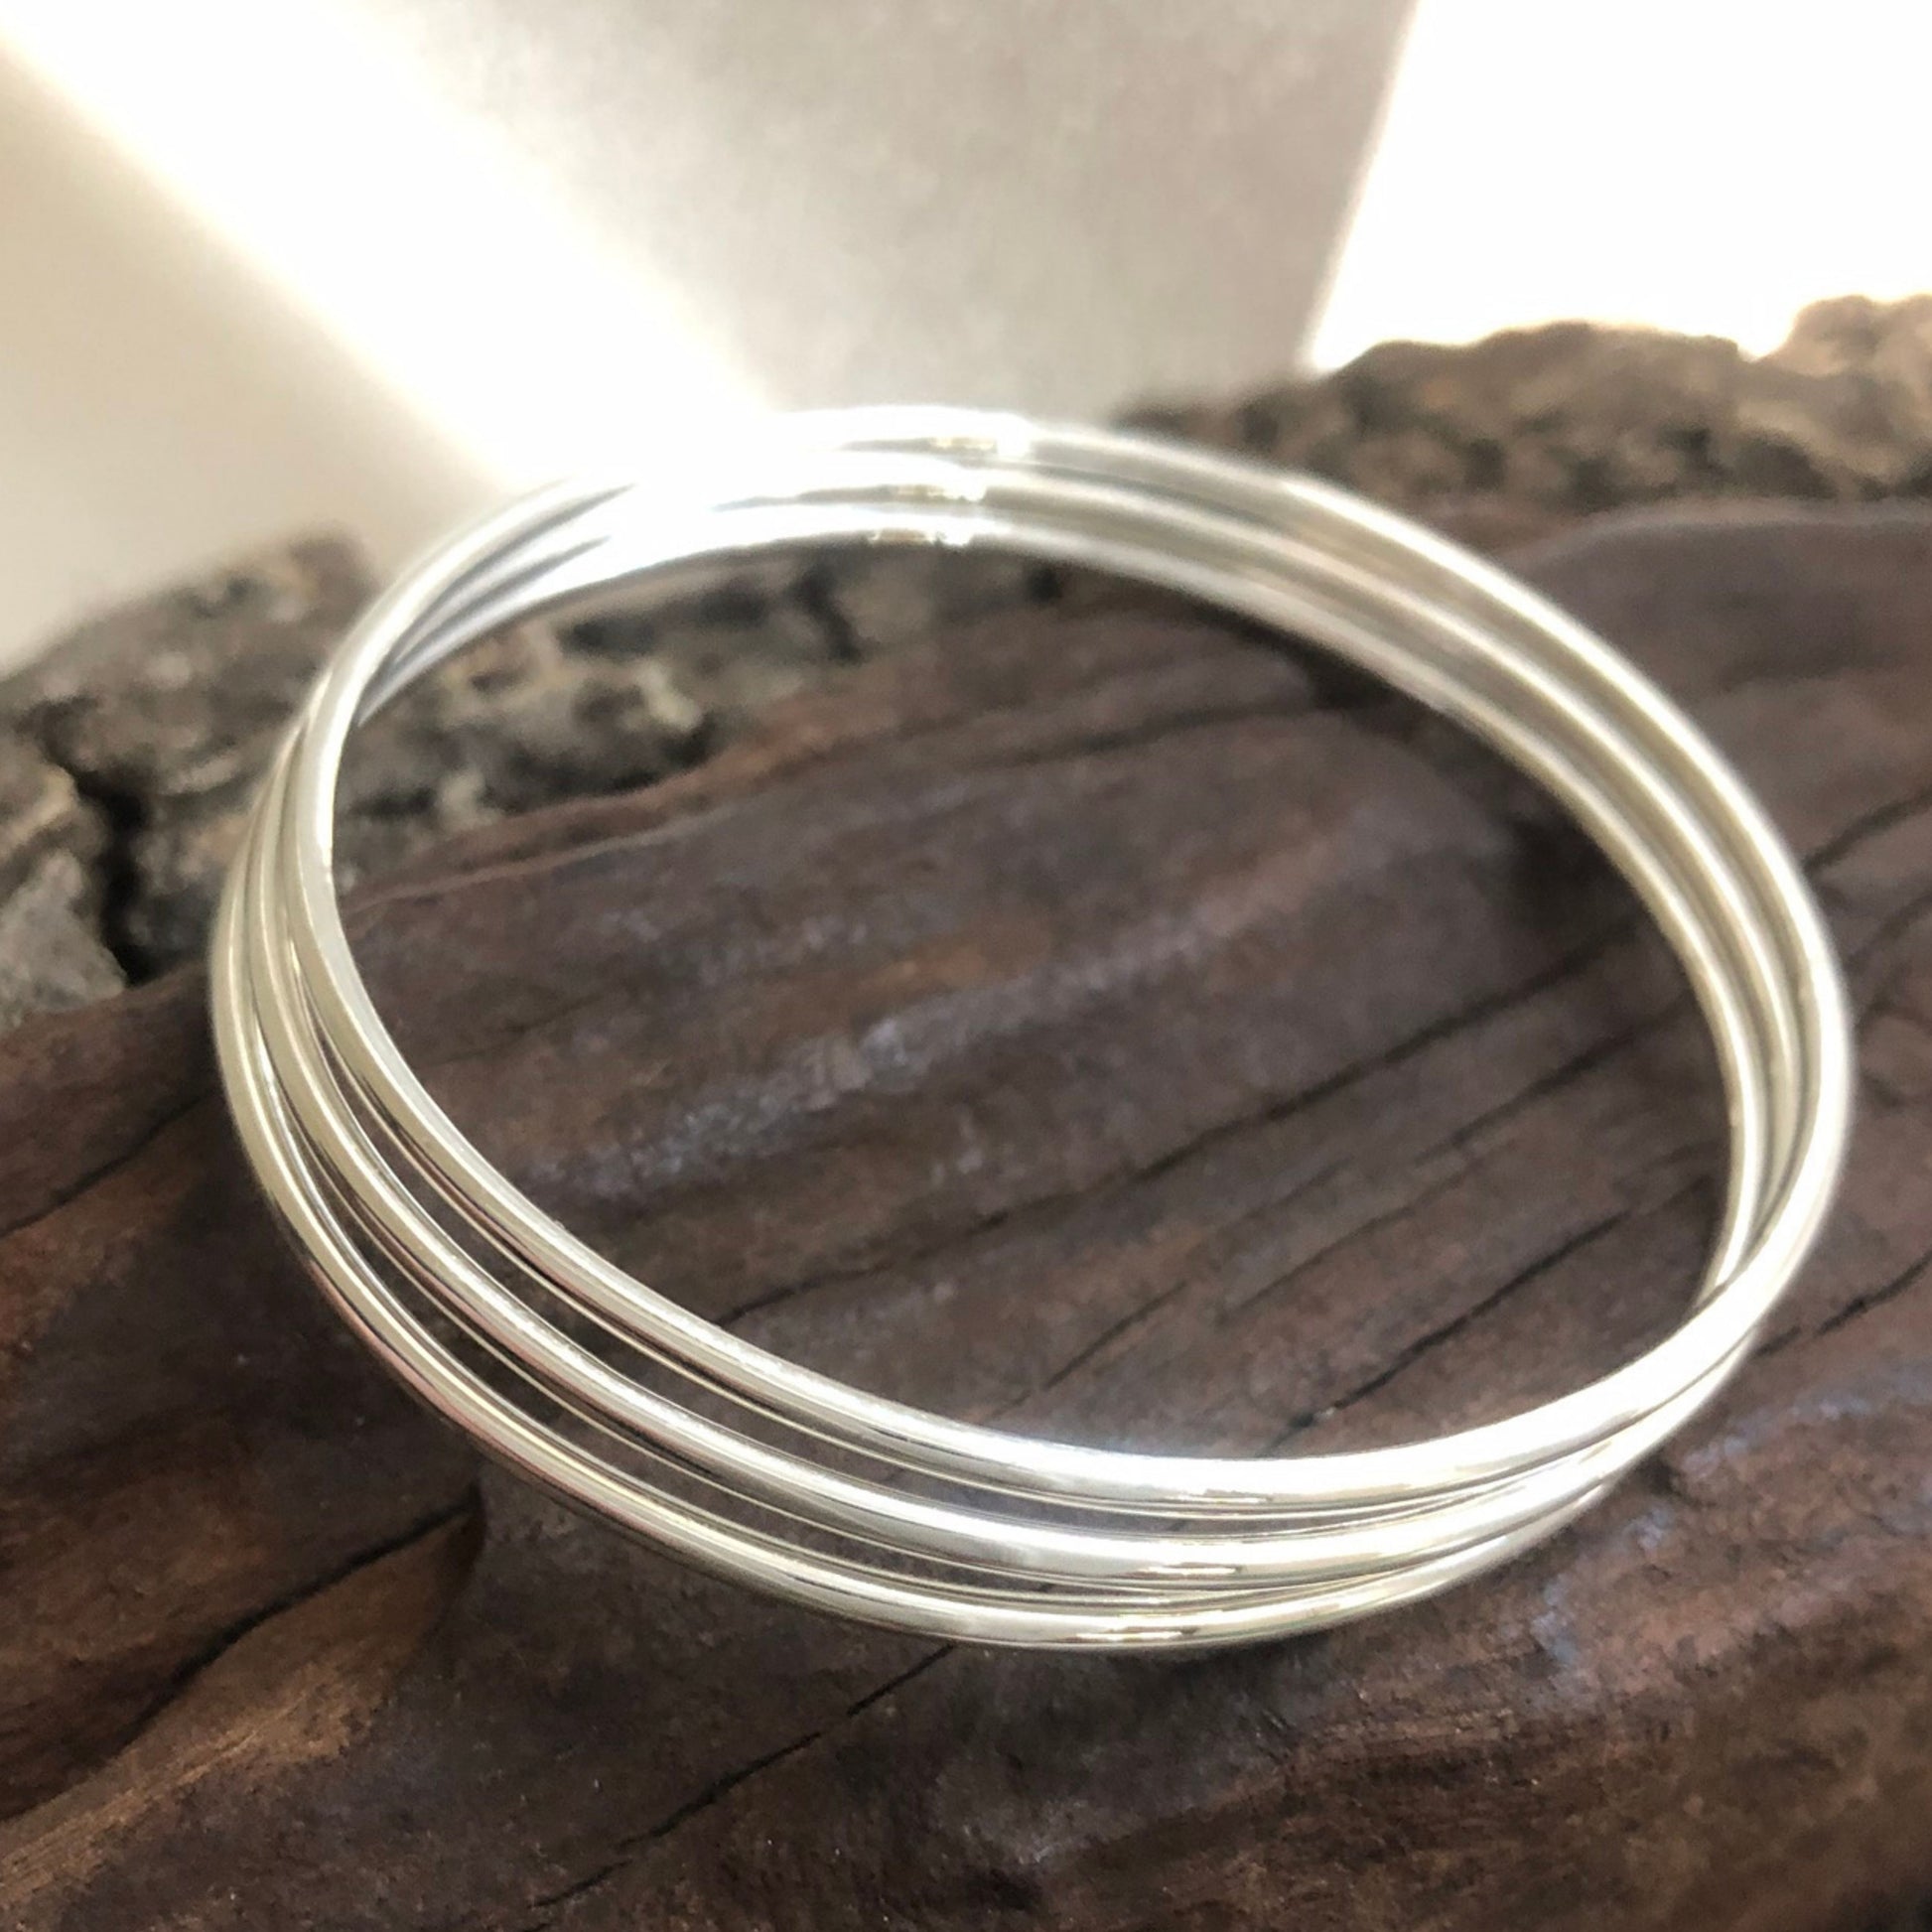 Set of Silver 2mm Bangles made in Bulawayo 